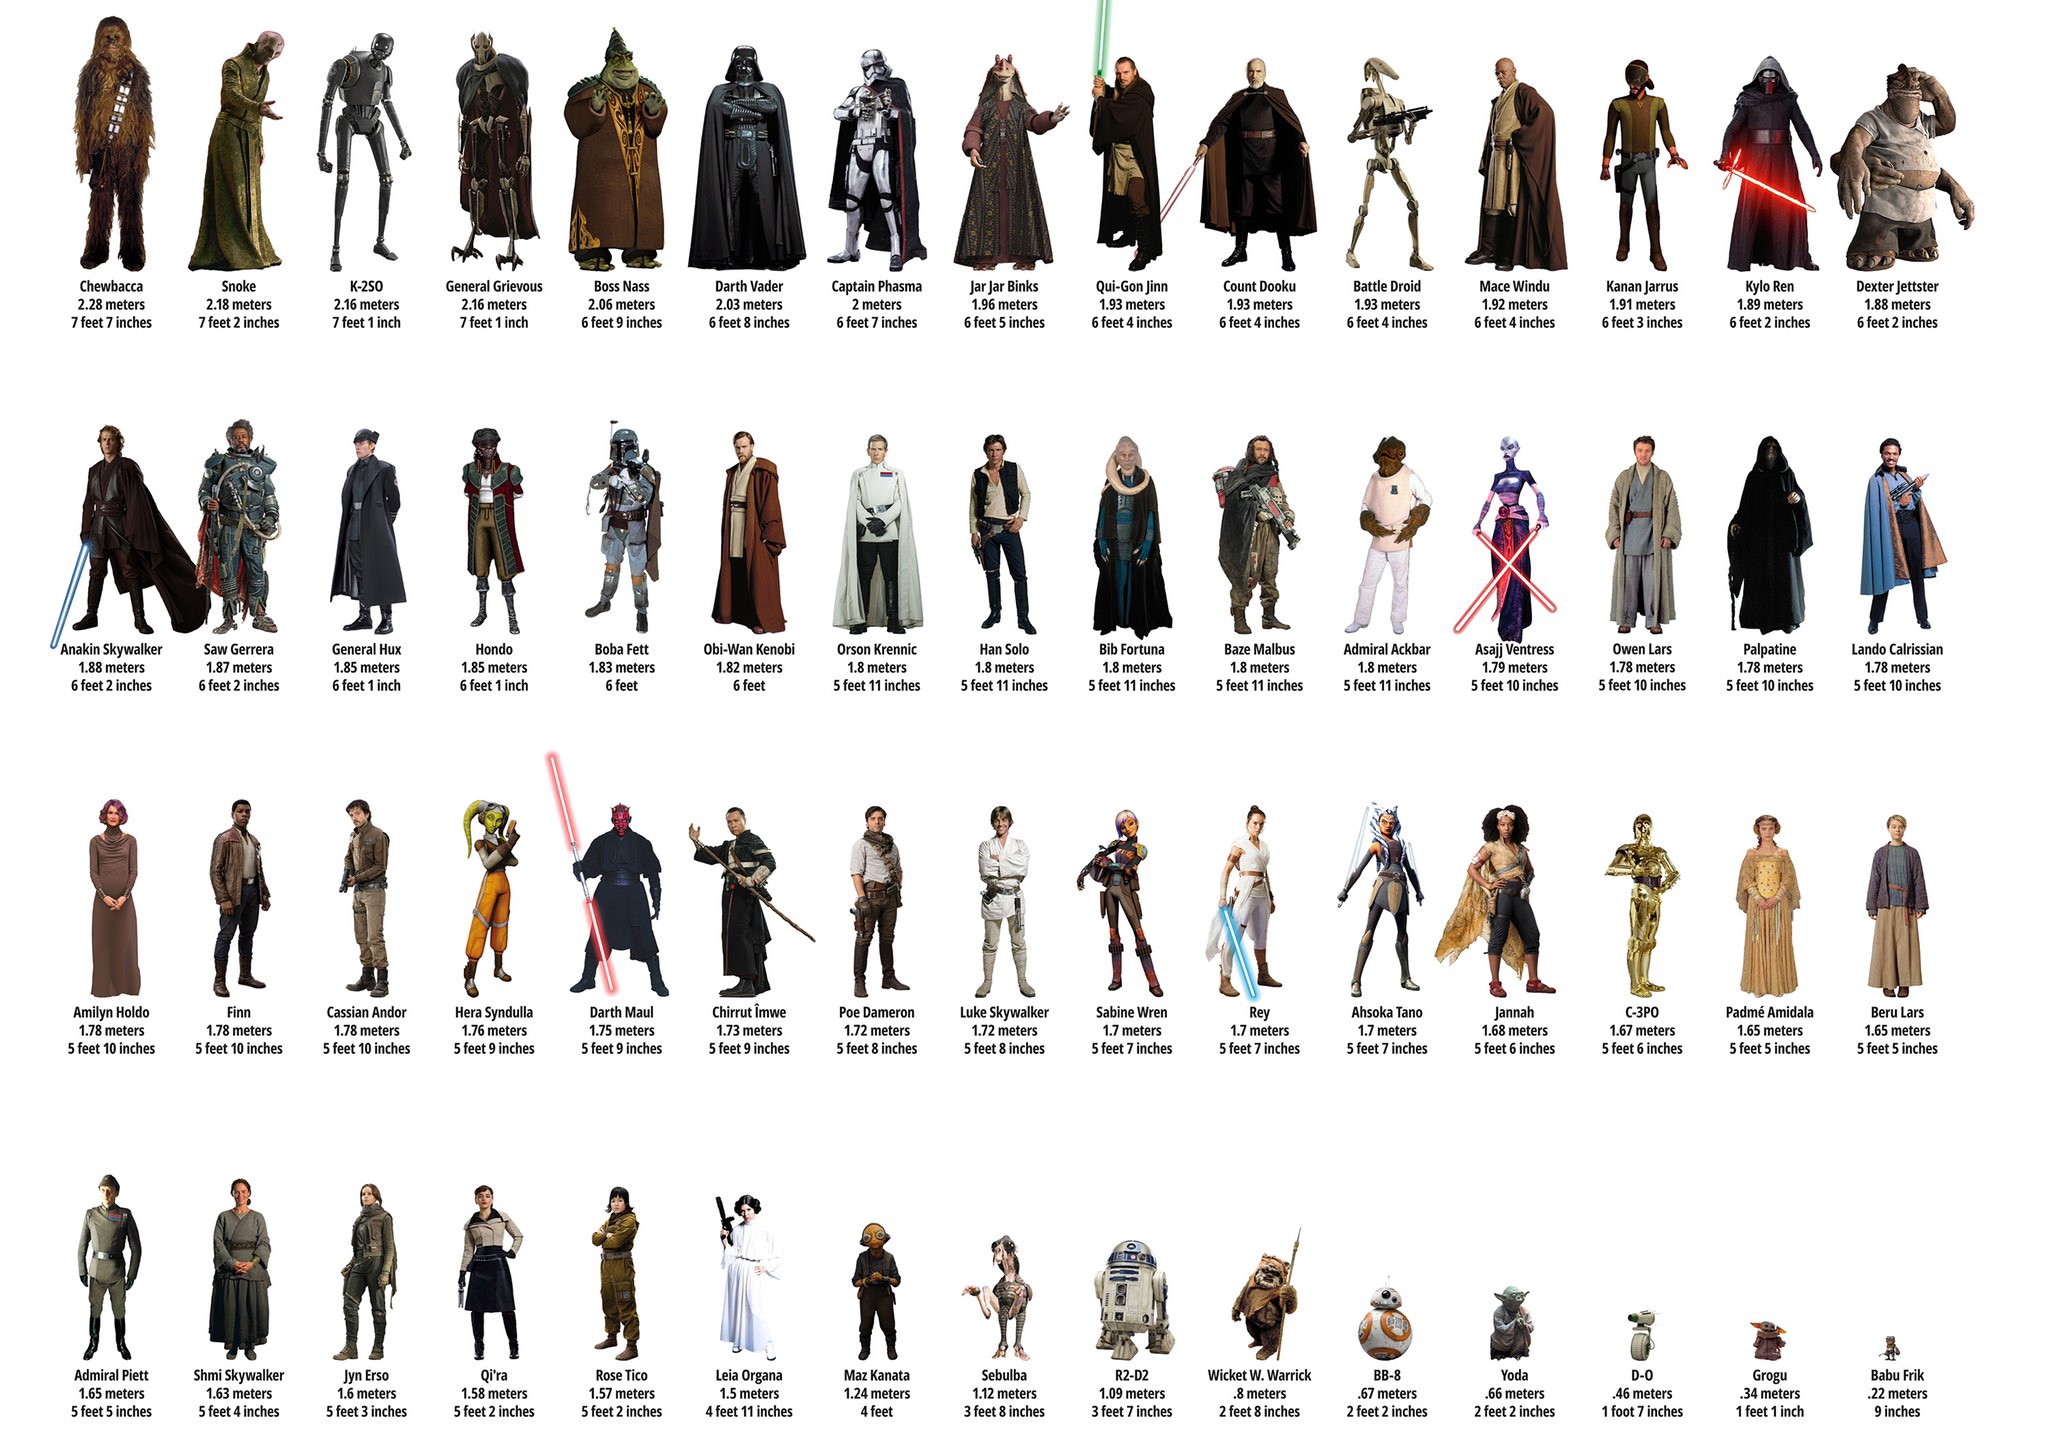 Zichzelf Ontwaken Soms soms Jedi Collecting on Twitter: "Character height chart Credit: u/--TheForce--  on r/StarWars #StarWars https://t.co/a9LXJDlxHe" / Twitter